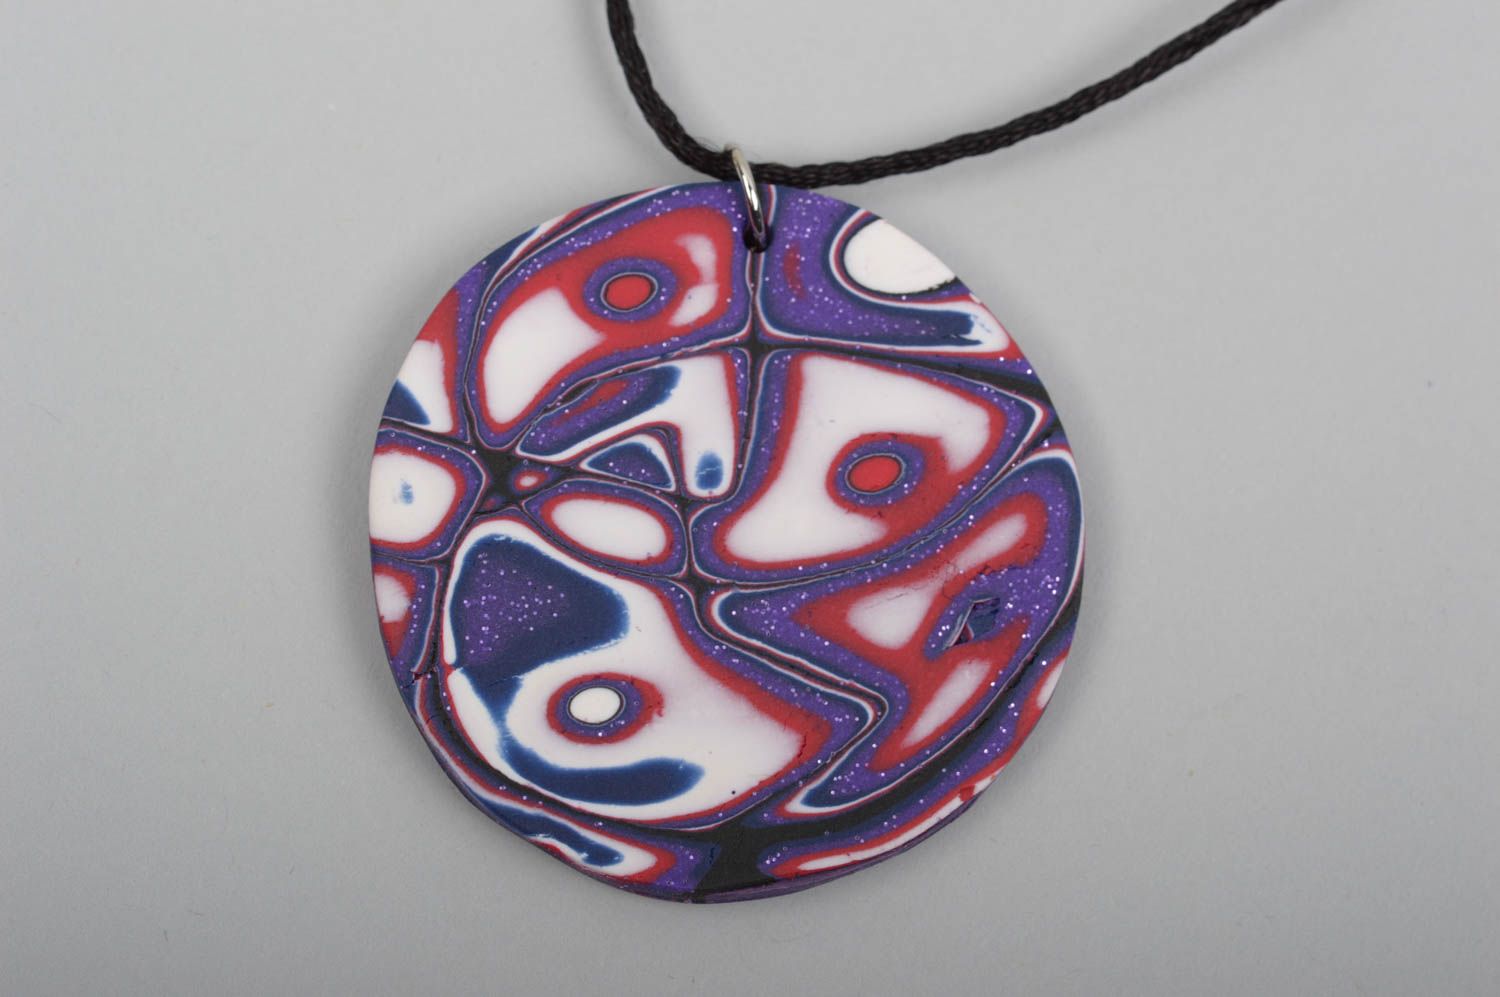 Fashion necklace handcrafted jewelry designer accessories polymer clay gift idea photo 3